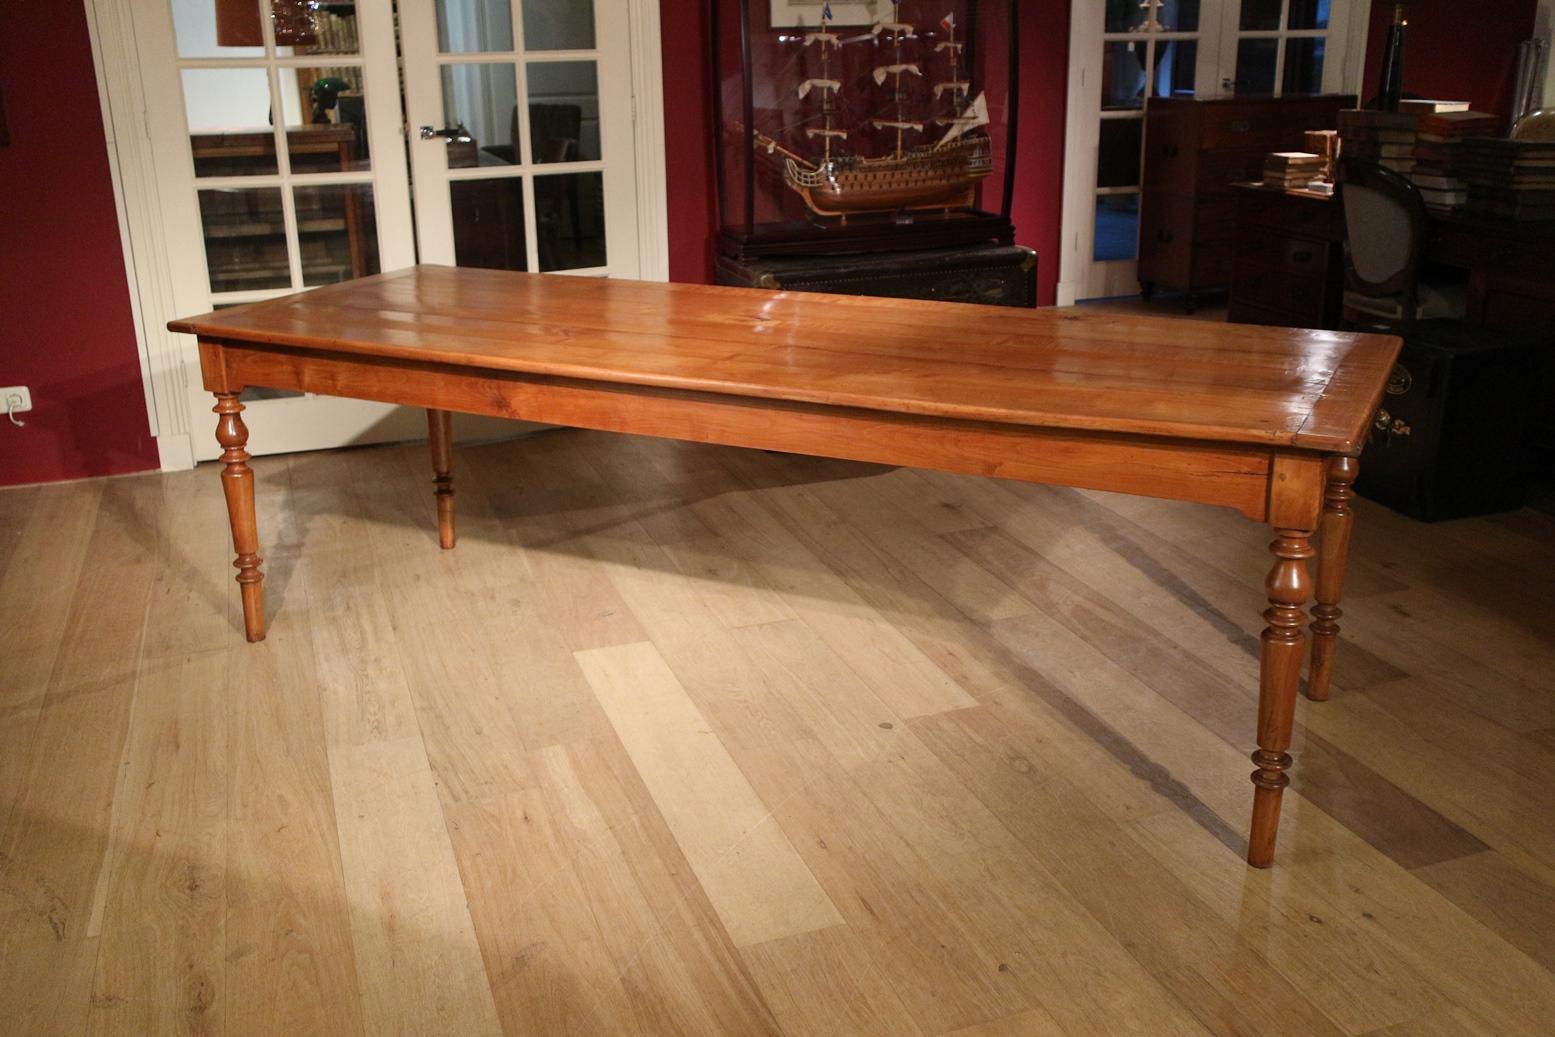 Beautiful large cherrywood table in perfect condition. The table has a chestnut wooden pull-out leaf and 1 drawer. Nice warm light color. Also a lot of legroom.
Origin: France
Period: Mid-19th century
Size: 248cm x 87cm x H 77cm (legroom 64cm).